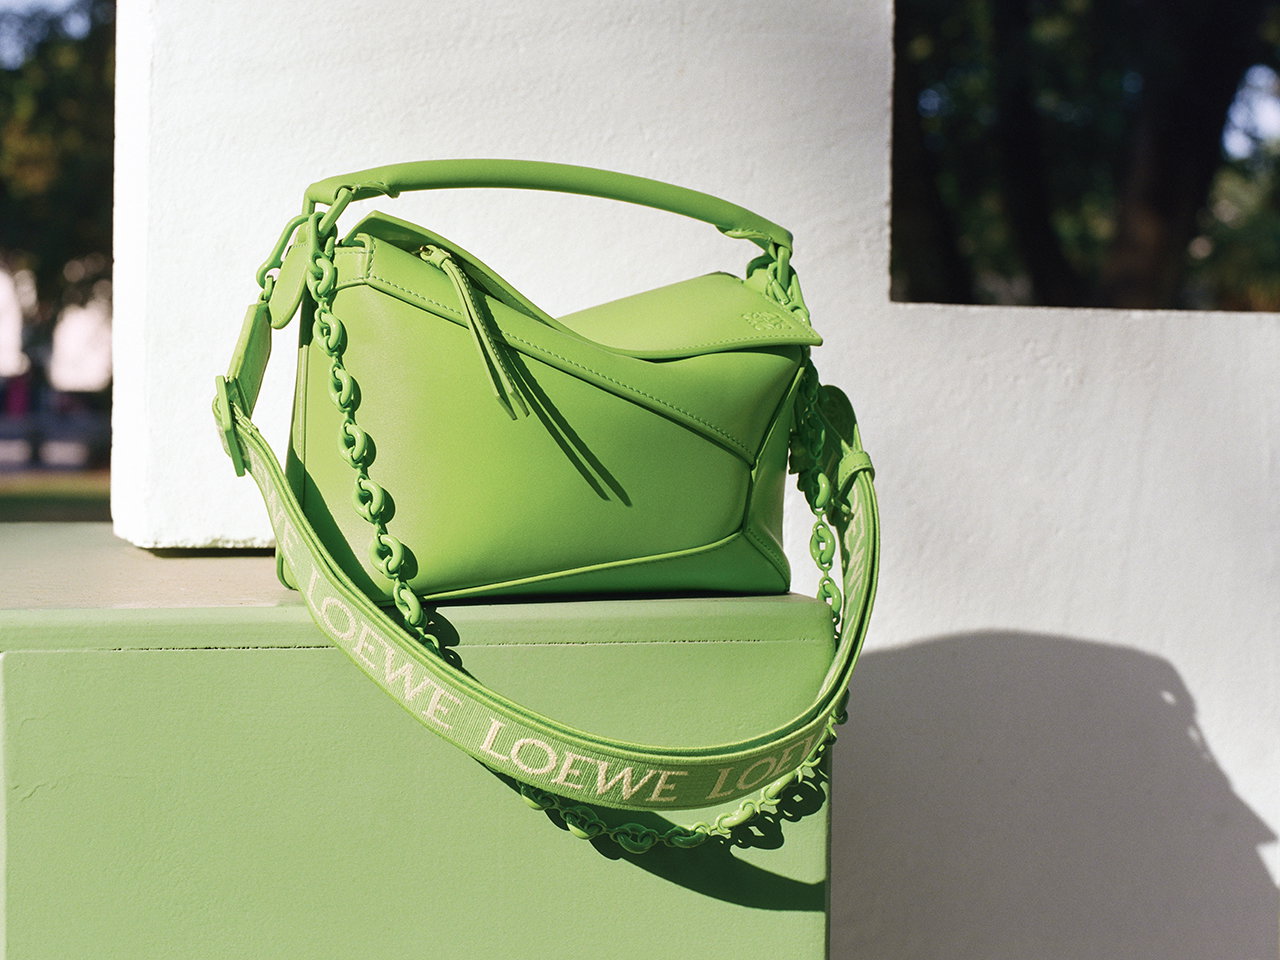 LOEWE's new collection inspired in chinese monochrome ceramics